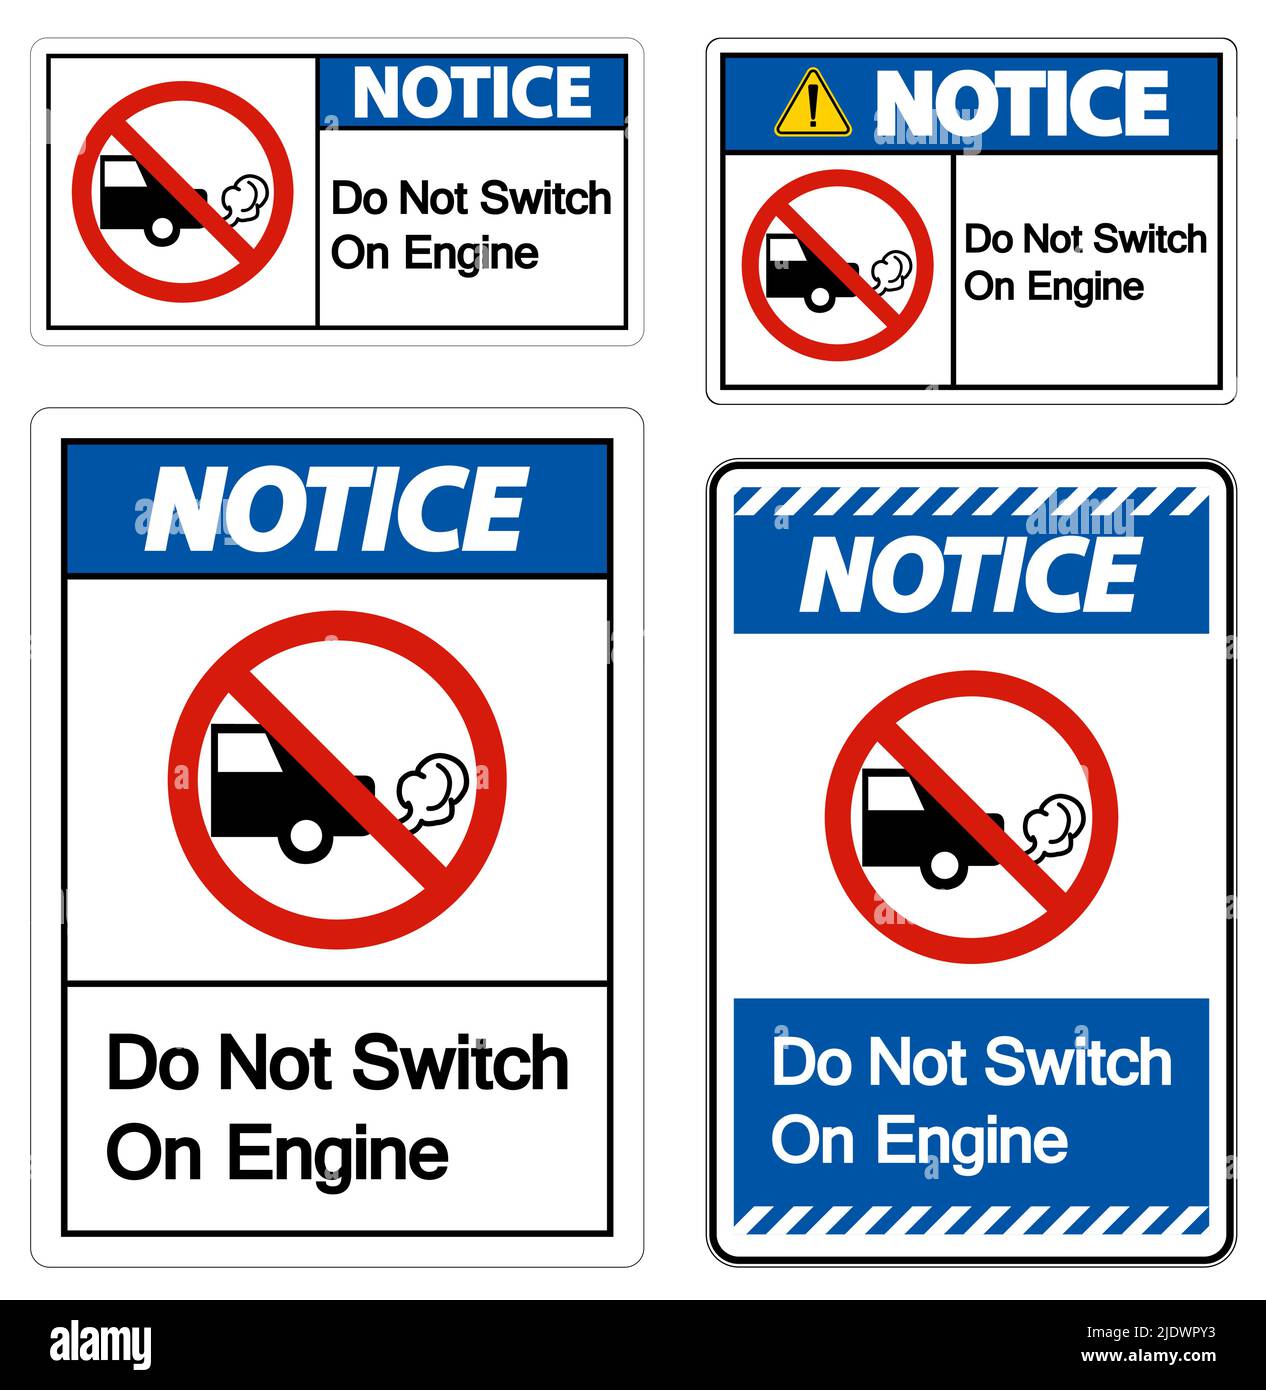 Notice Do Not Switch On Engine Sign On White Background Stock Vector